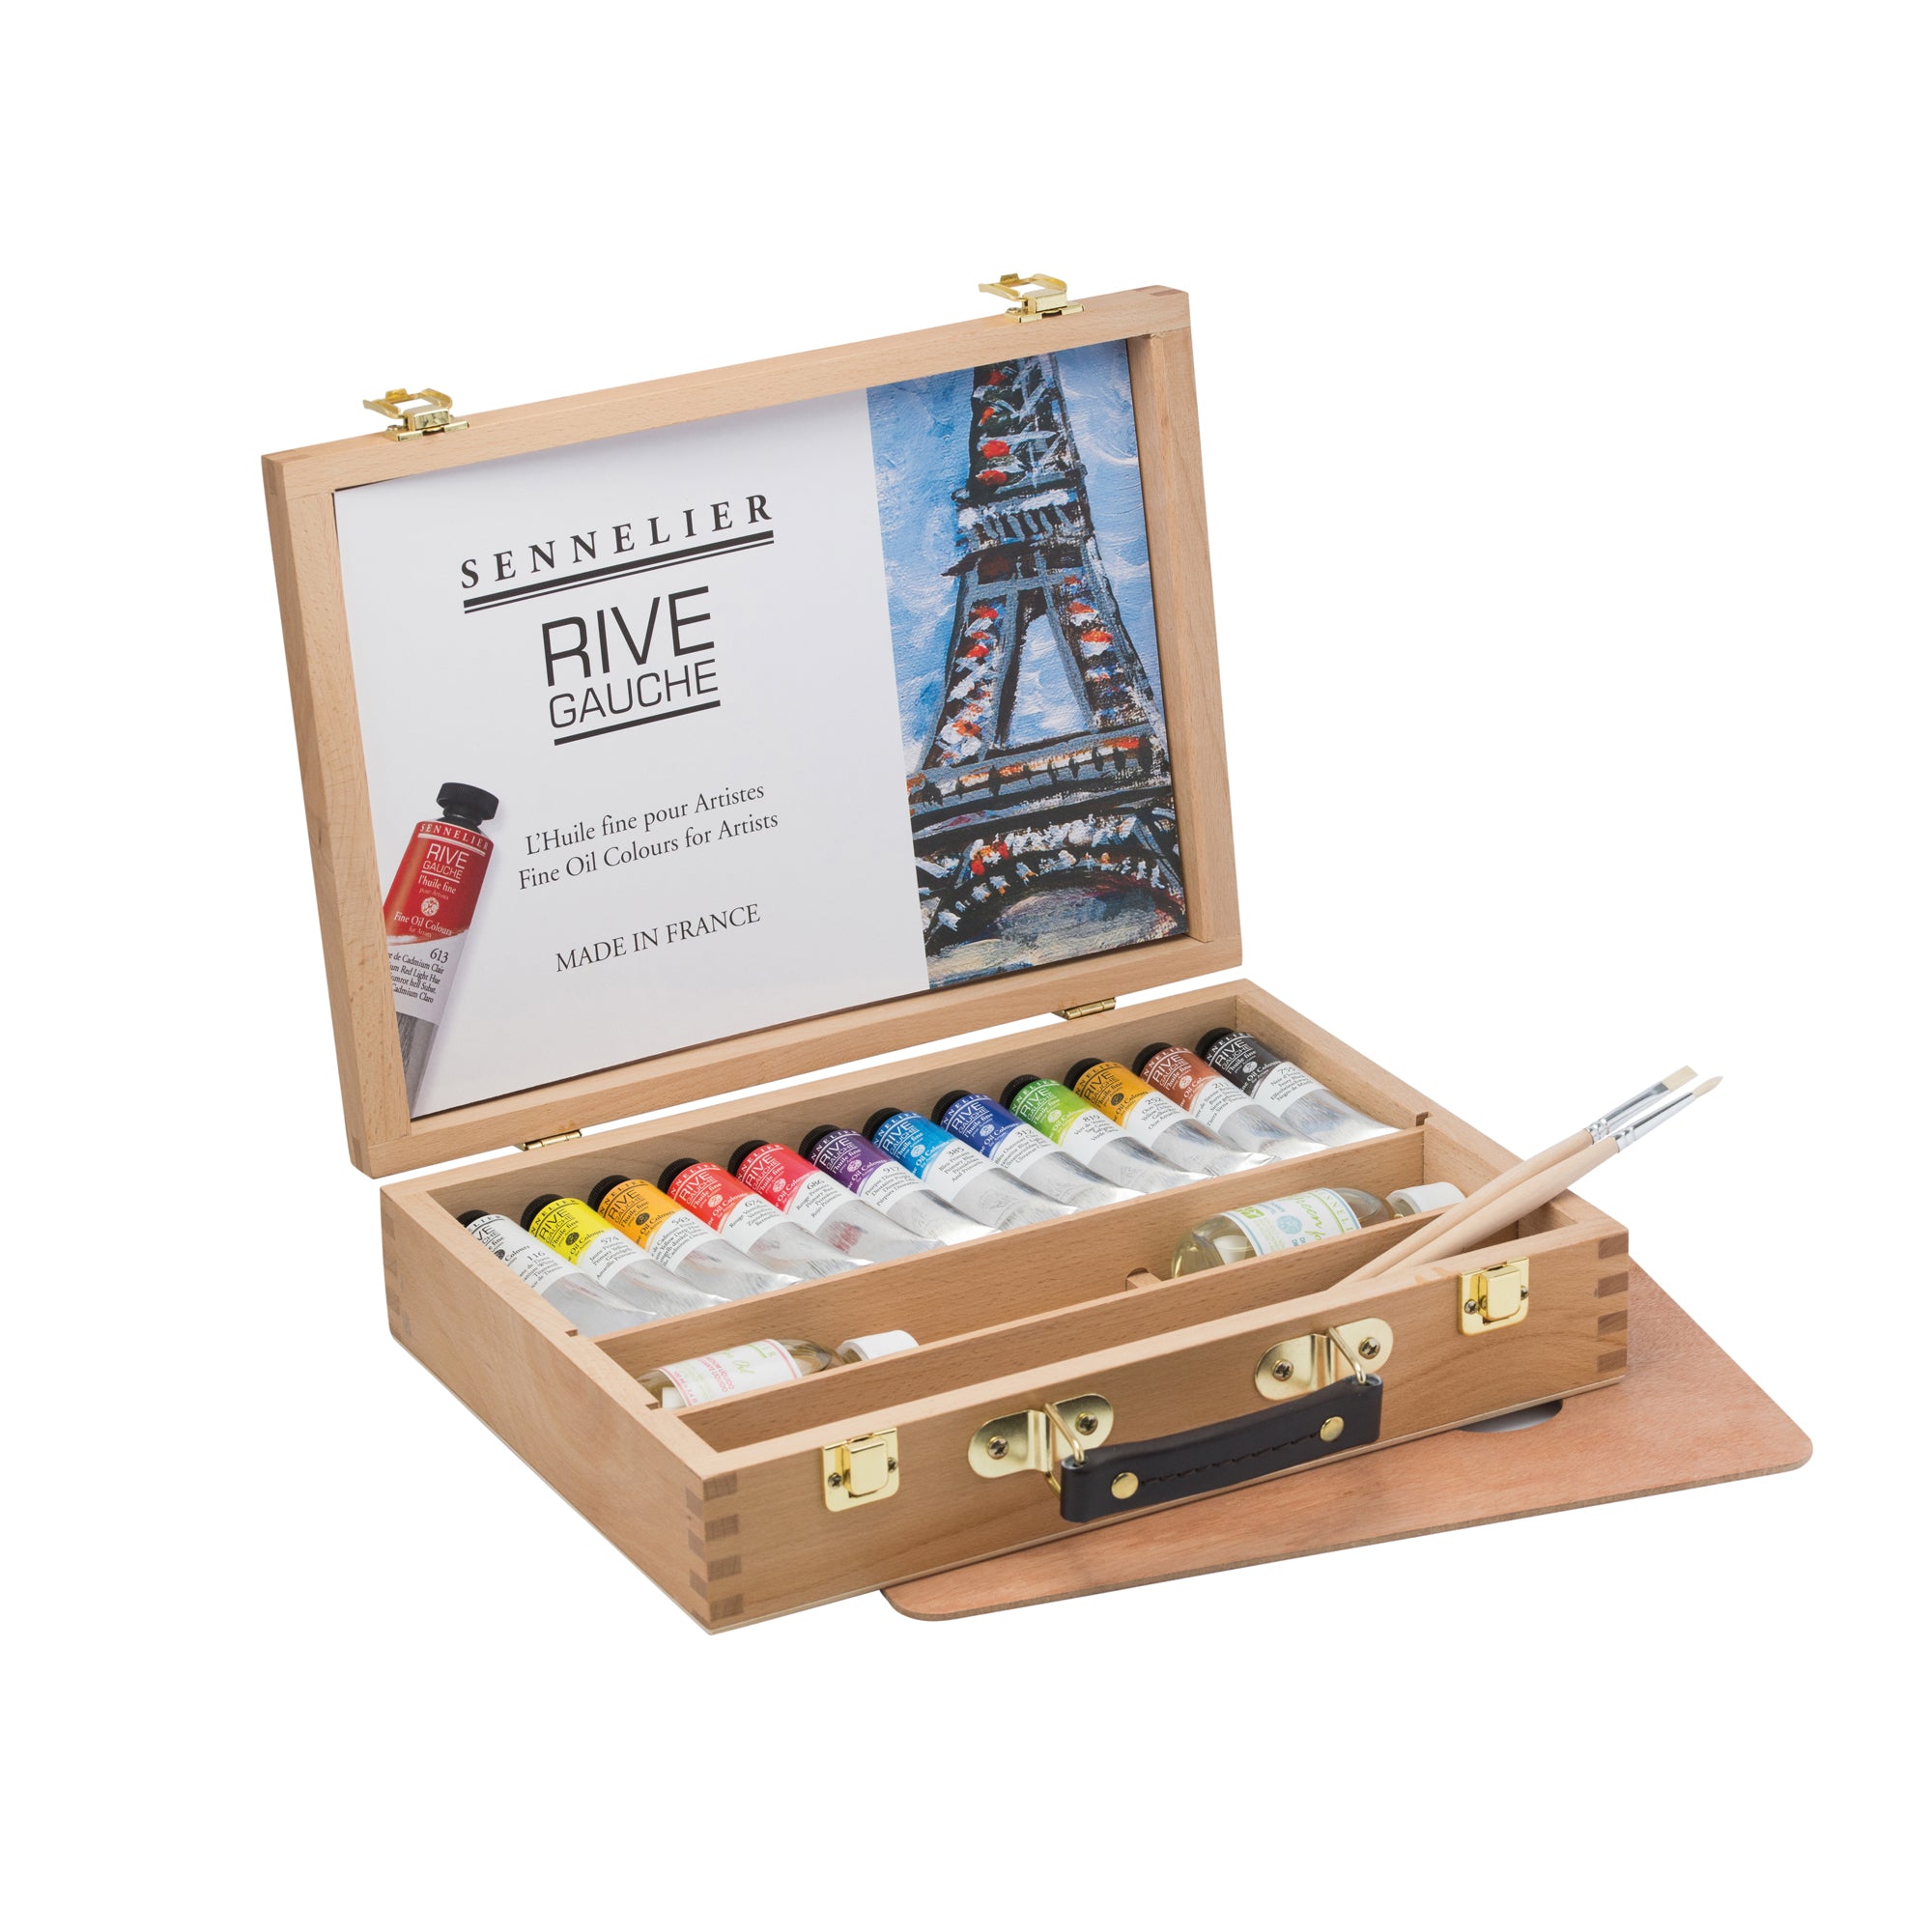 Sennelier Rive Gauche (Fast Drying Oils) - Wooden Box Set - Includes Complimentary Artists Apron